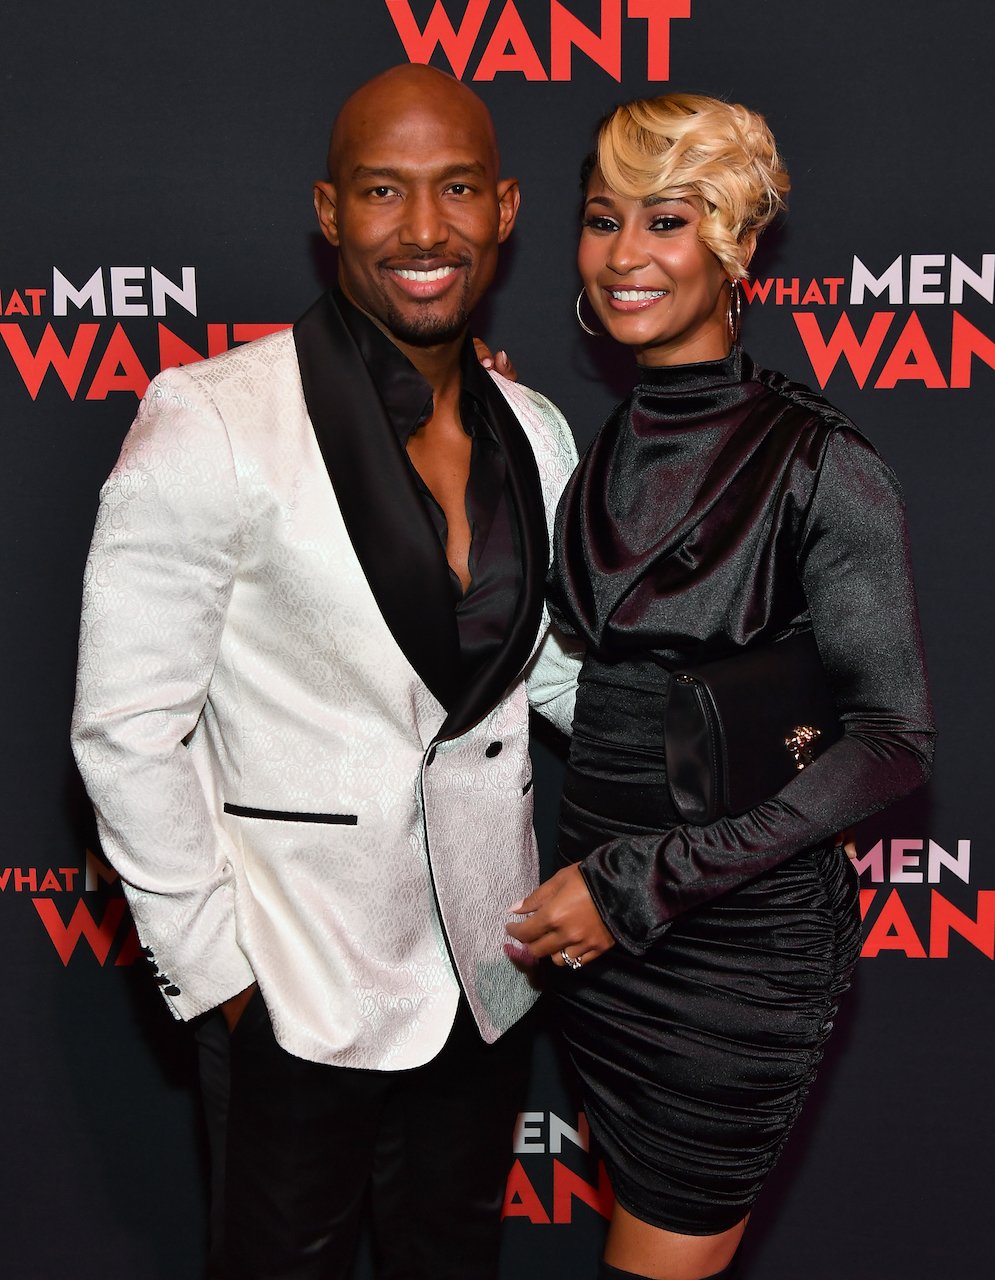 Martell and Melody Holt pose on the red carpet; Martell admits to regrets about the way he cheated in his marriage